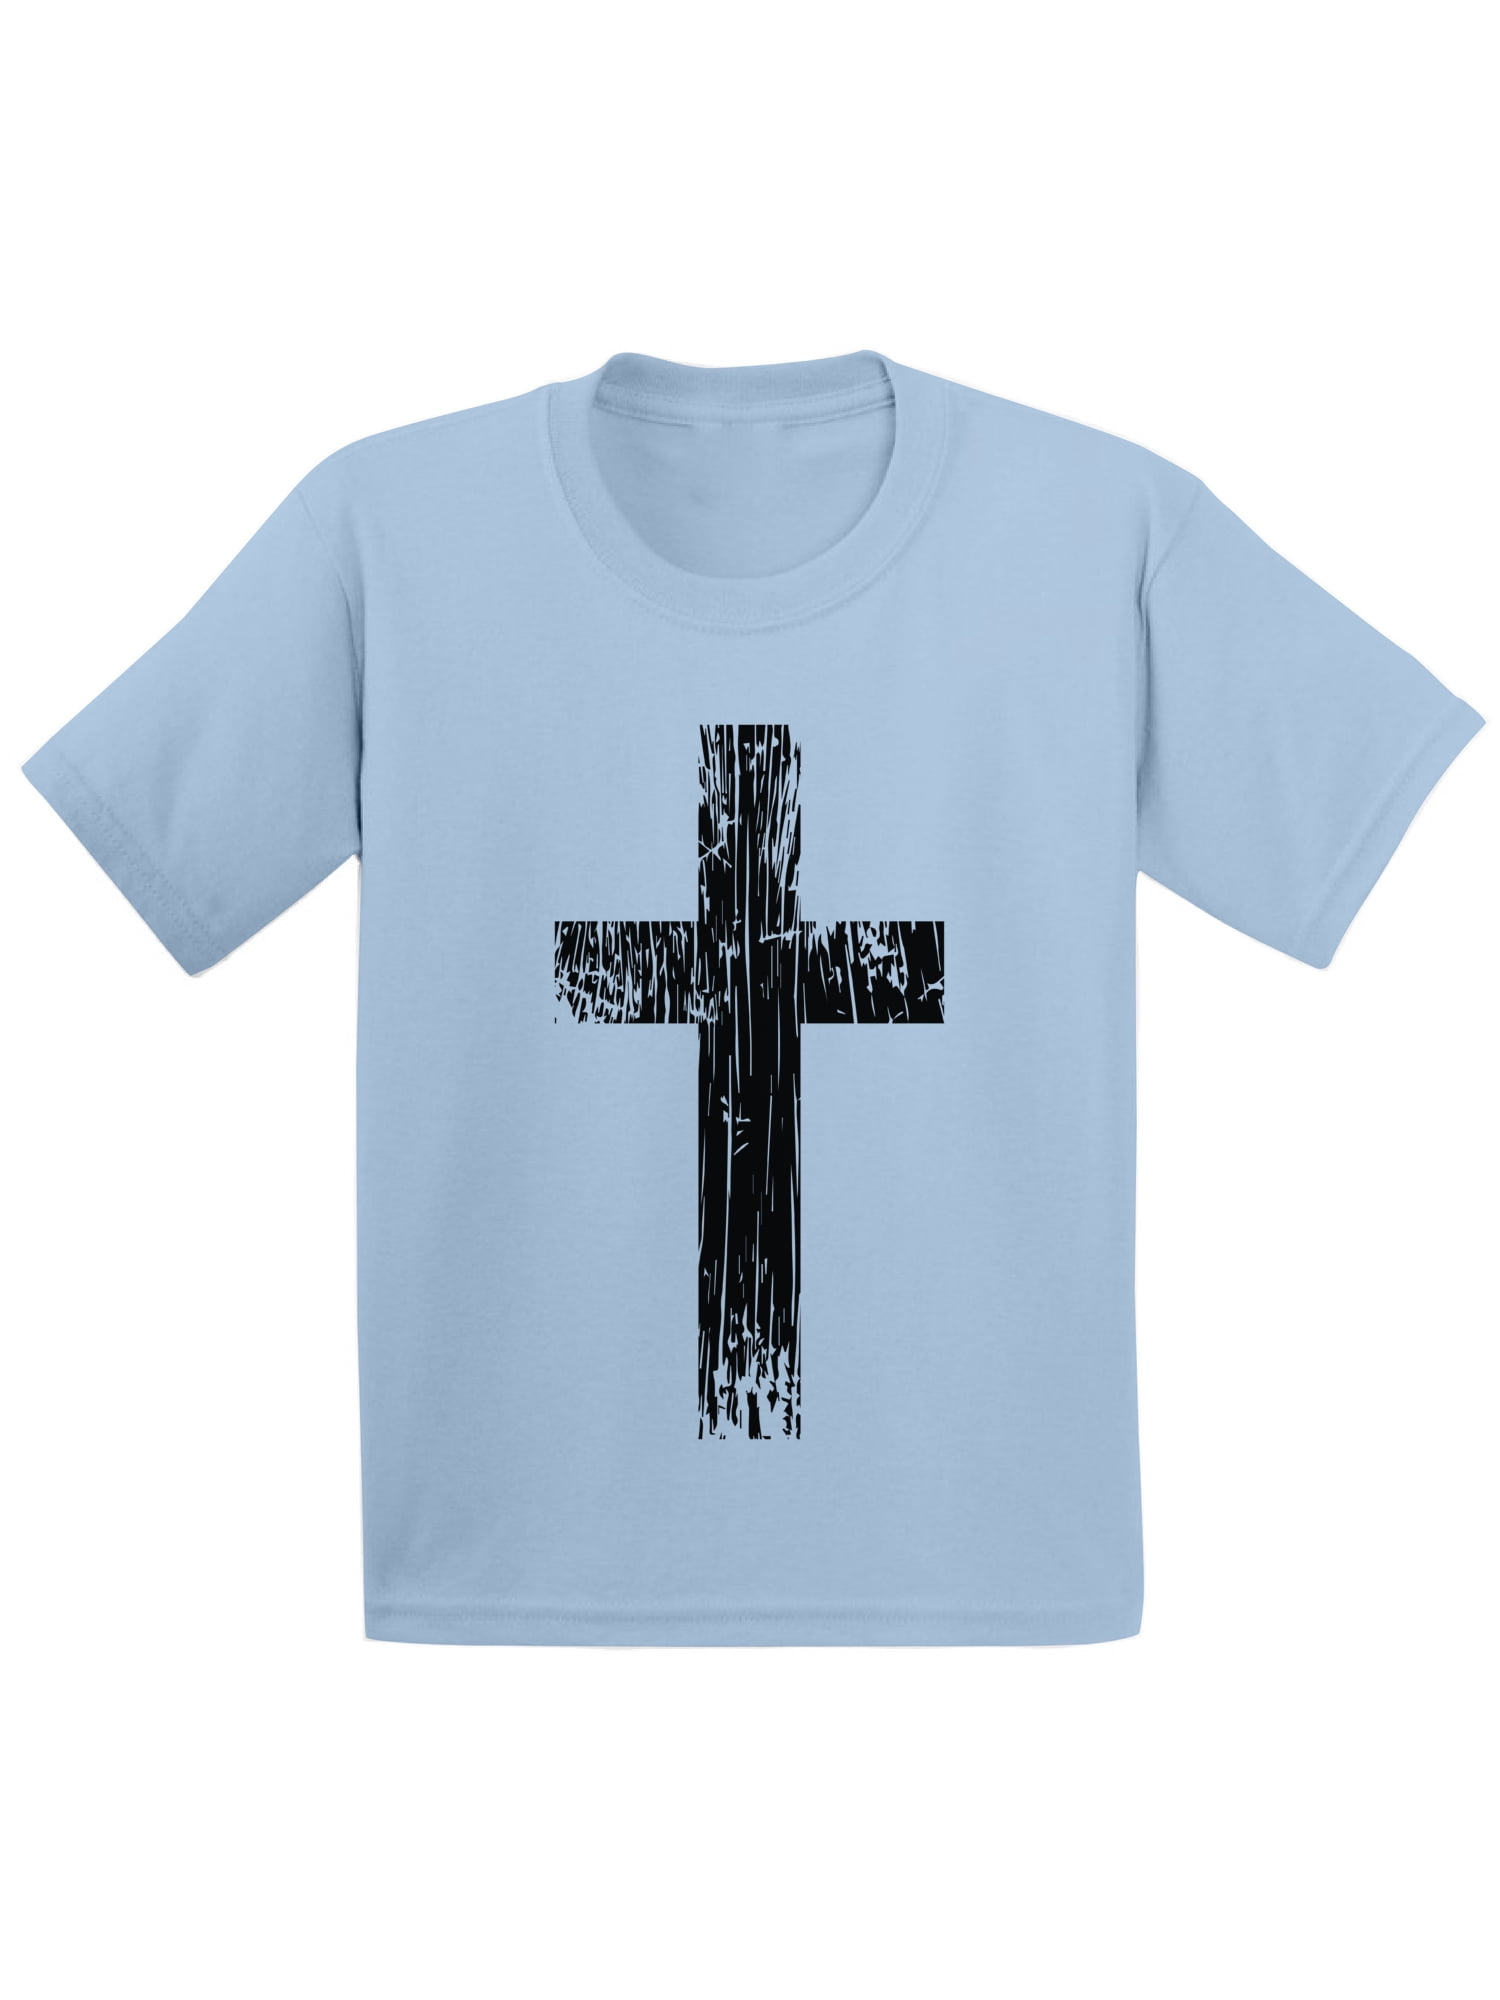 christian gifts for boys